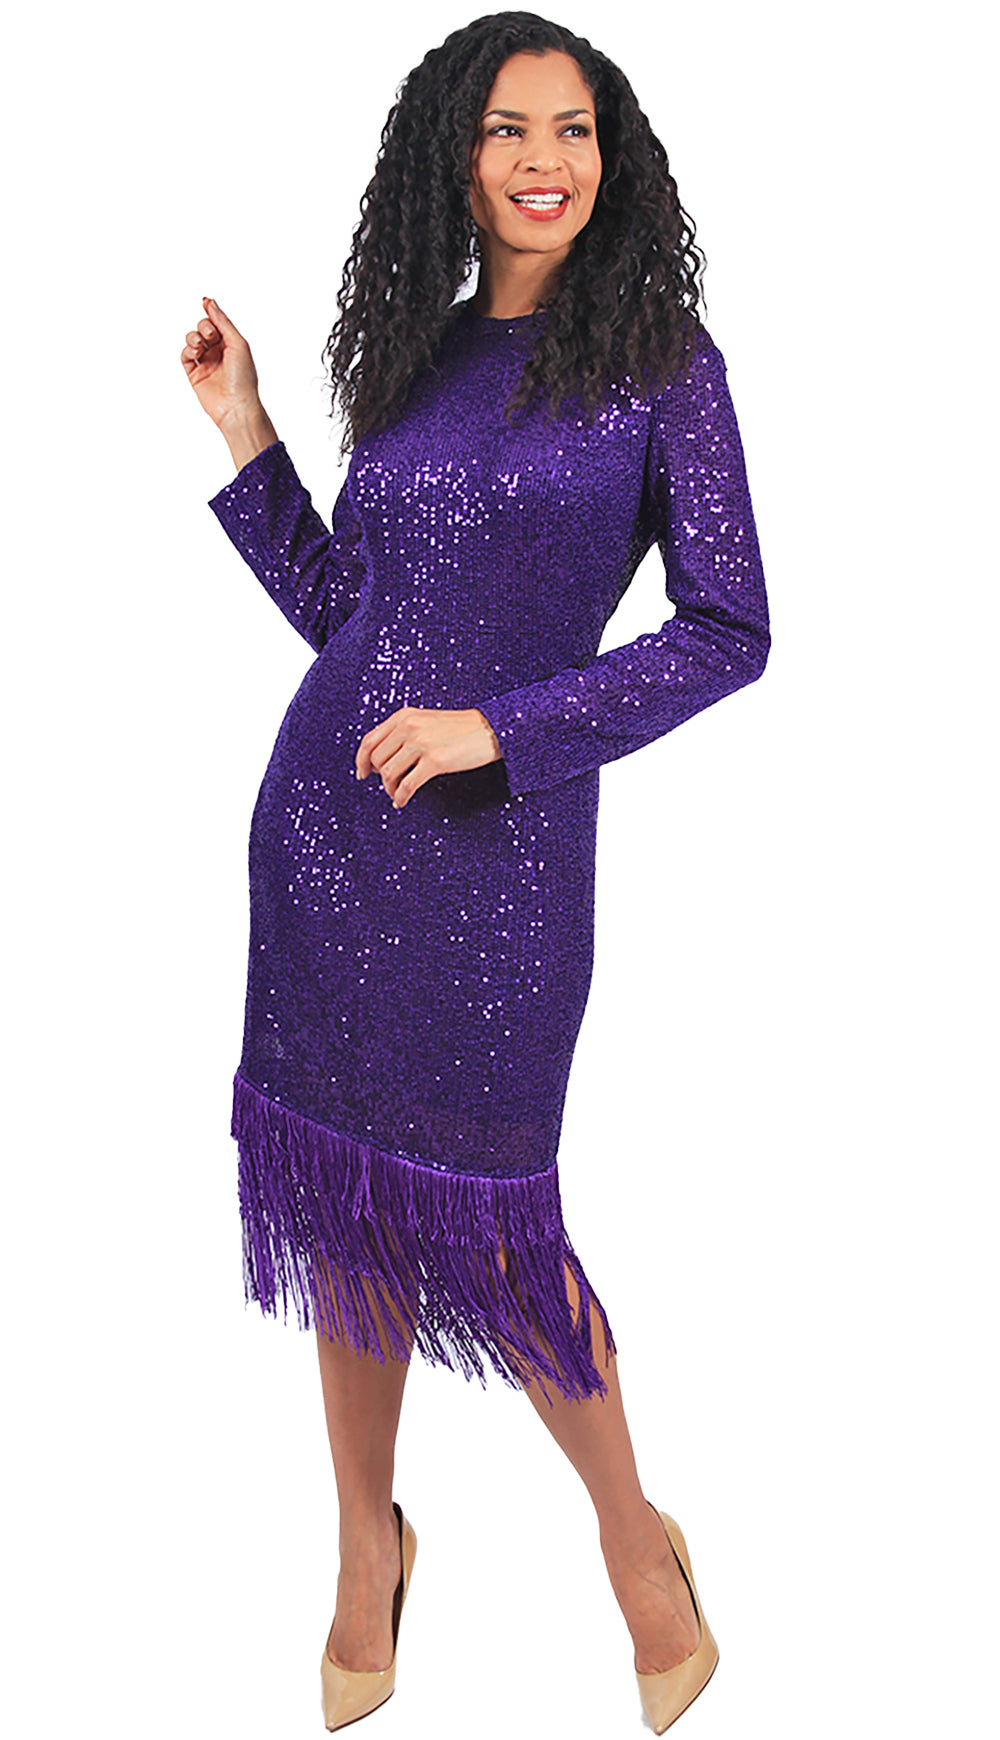 Diana Sequin Dress With Fringe 8564-PU Size 8-24